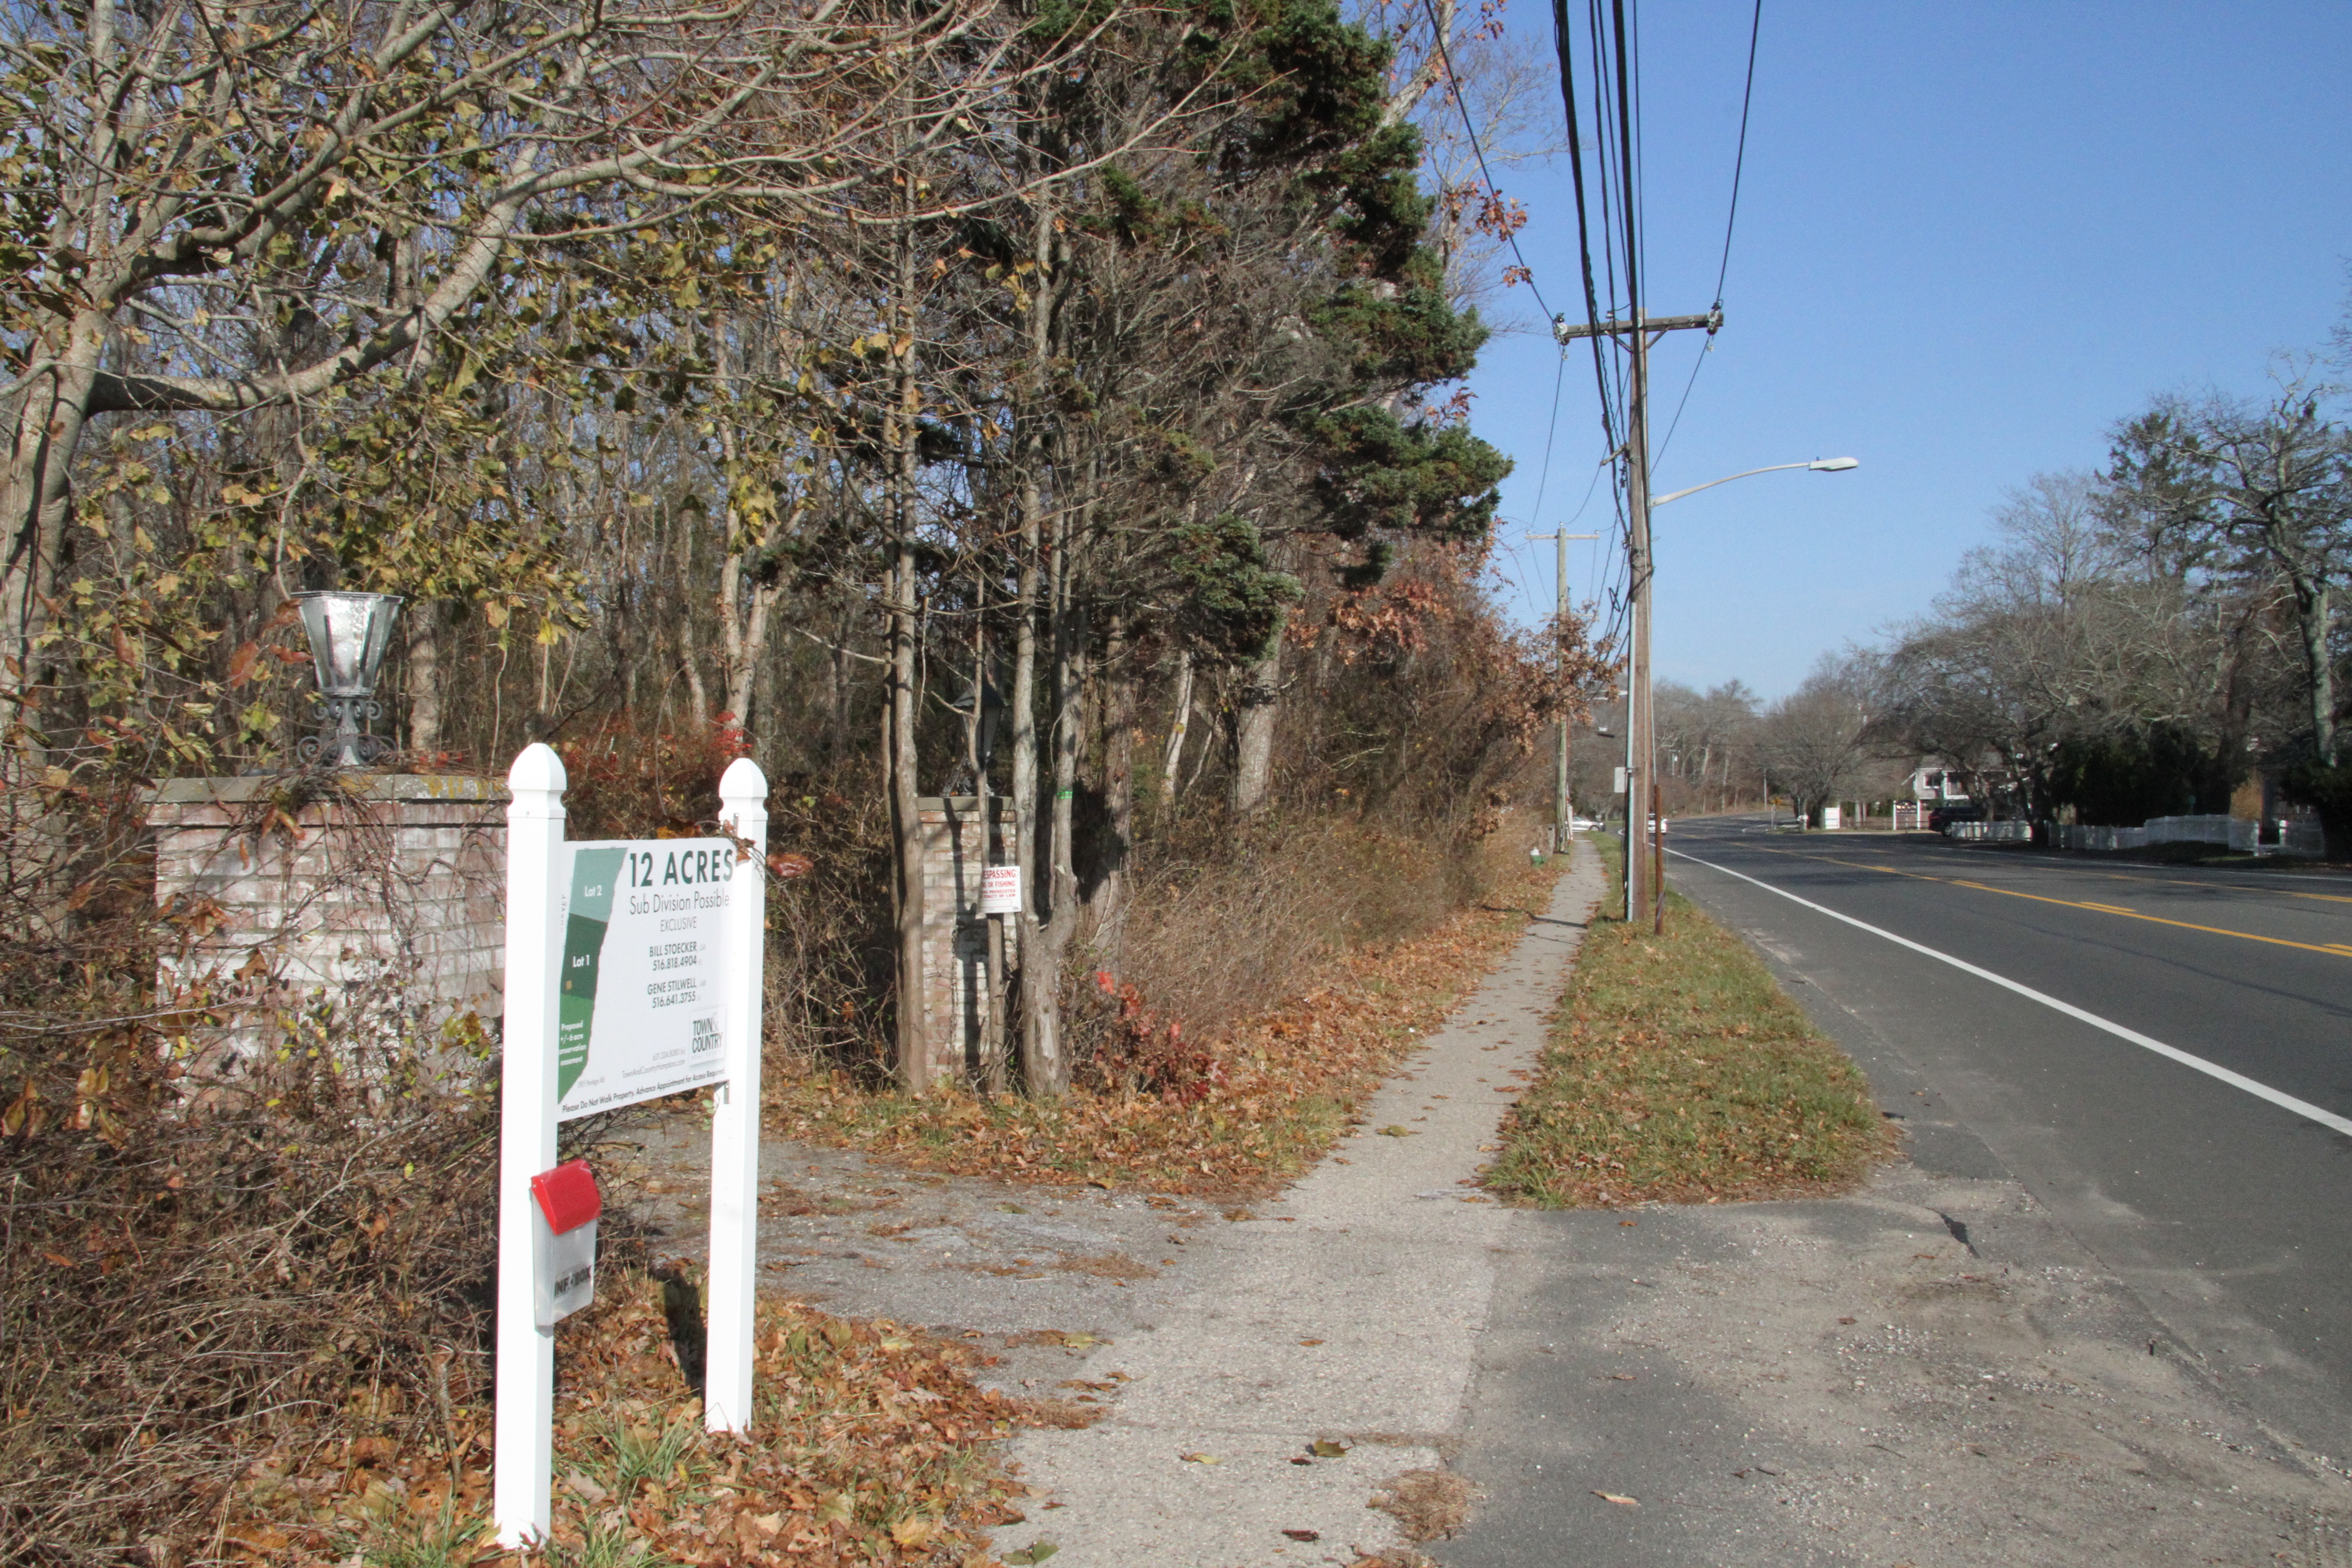 East Hampton Town has an agreement to purchase 12 acres of land off Pantigo Road, a portion of which it plans to use for a future affordable housing development project. 